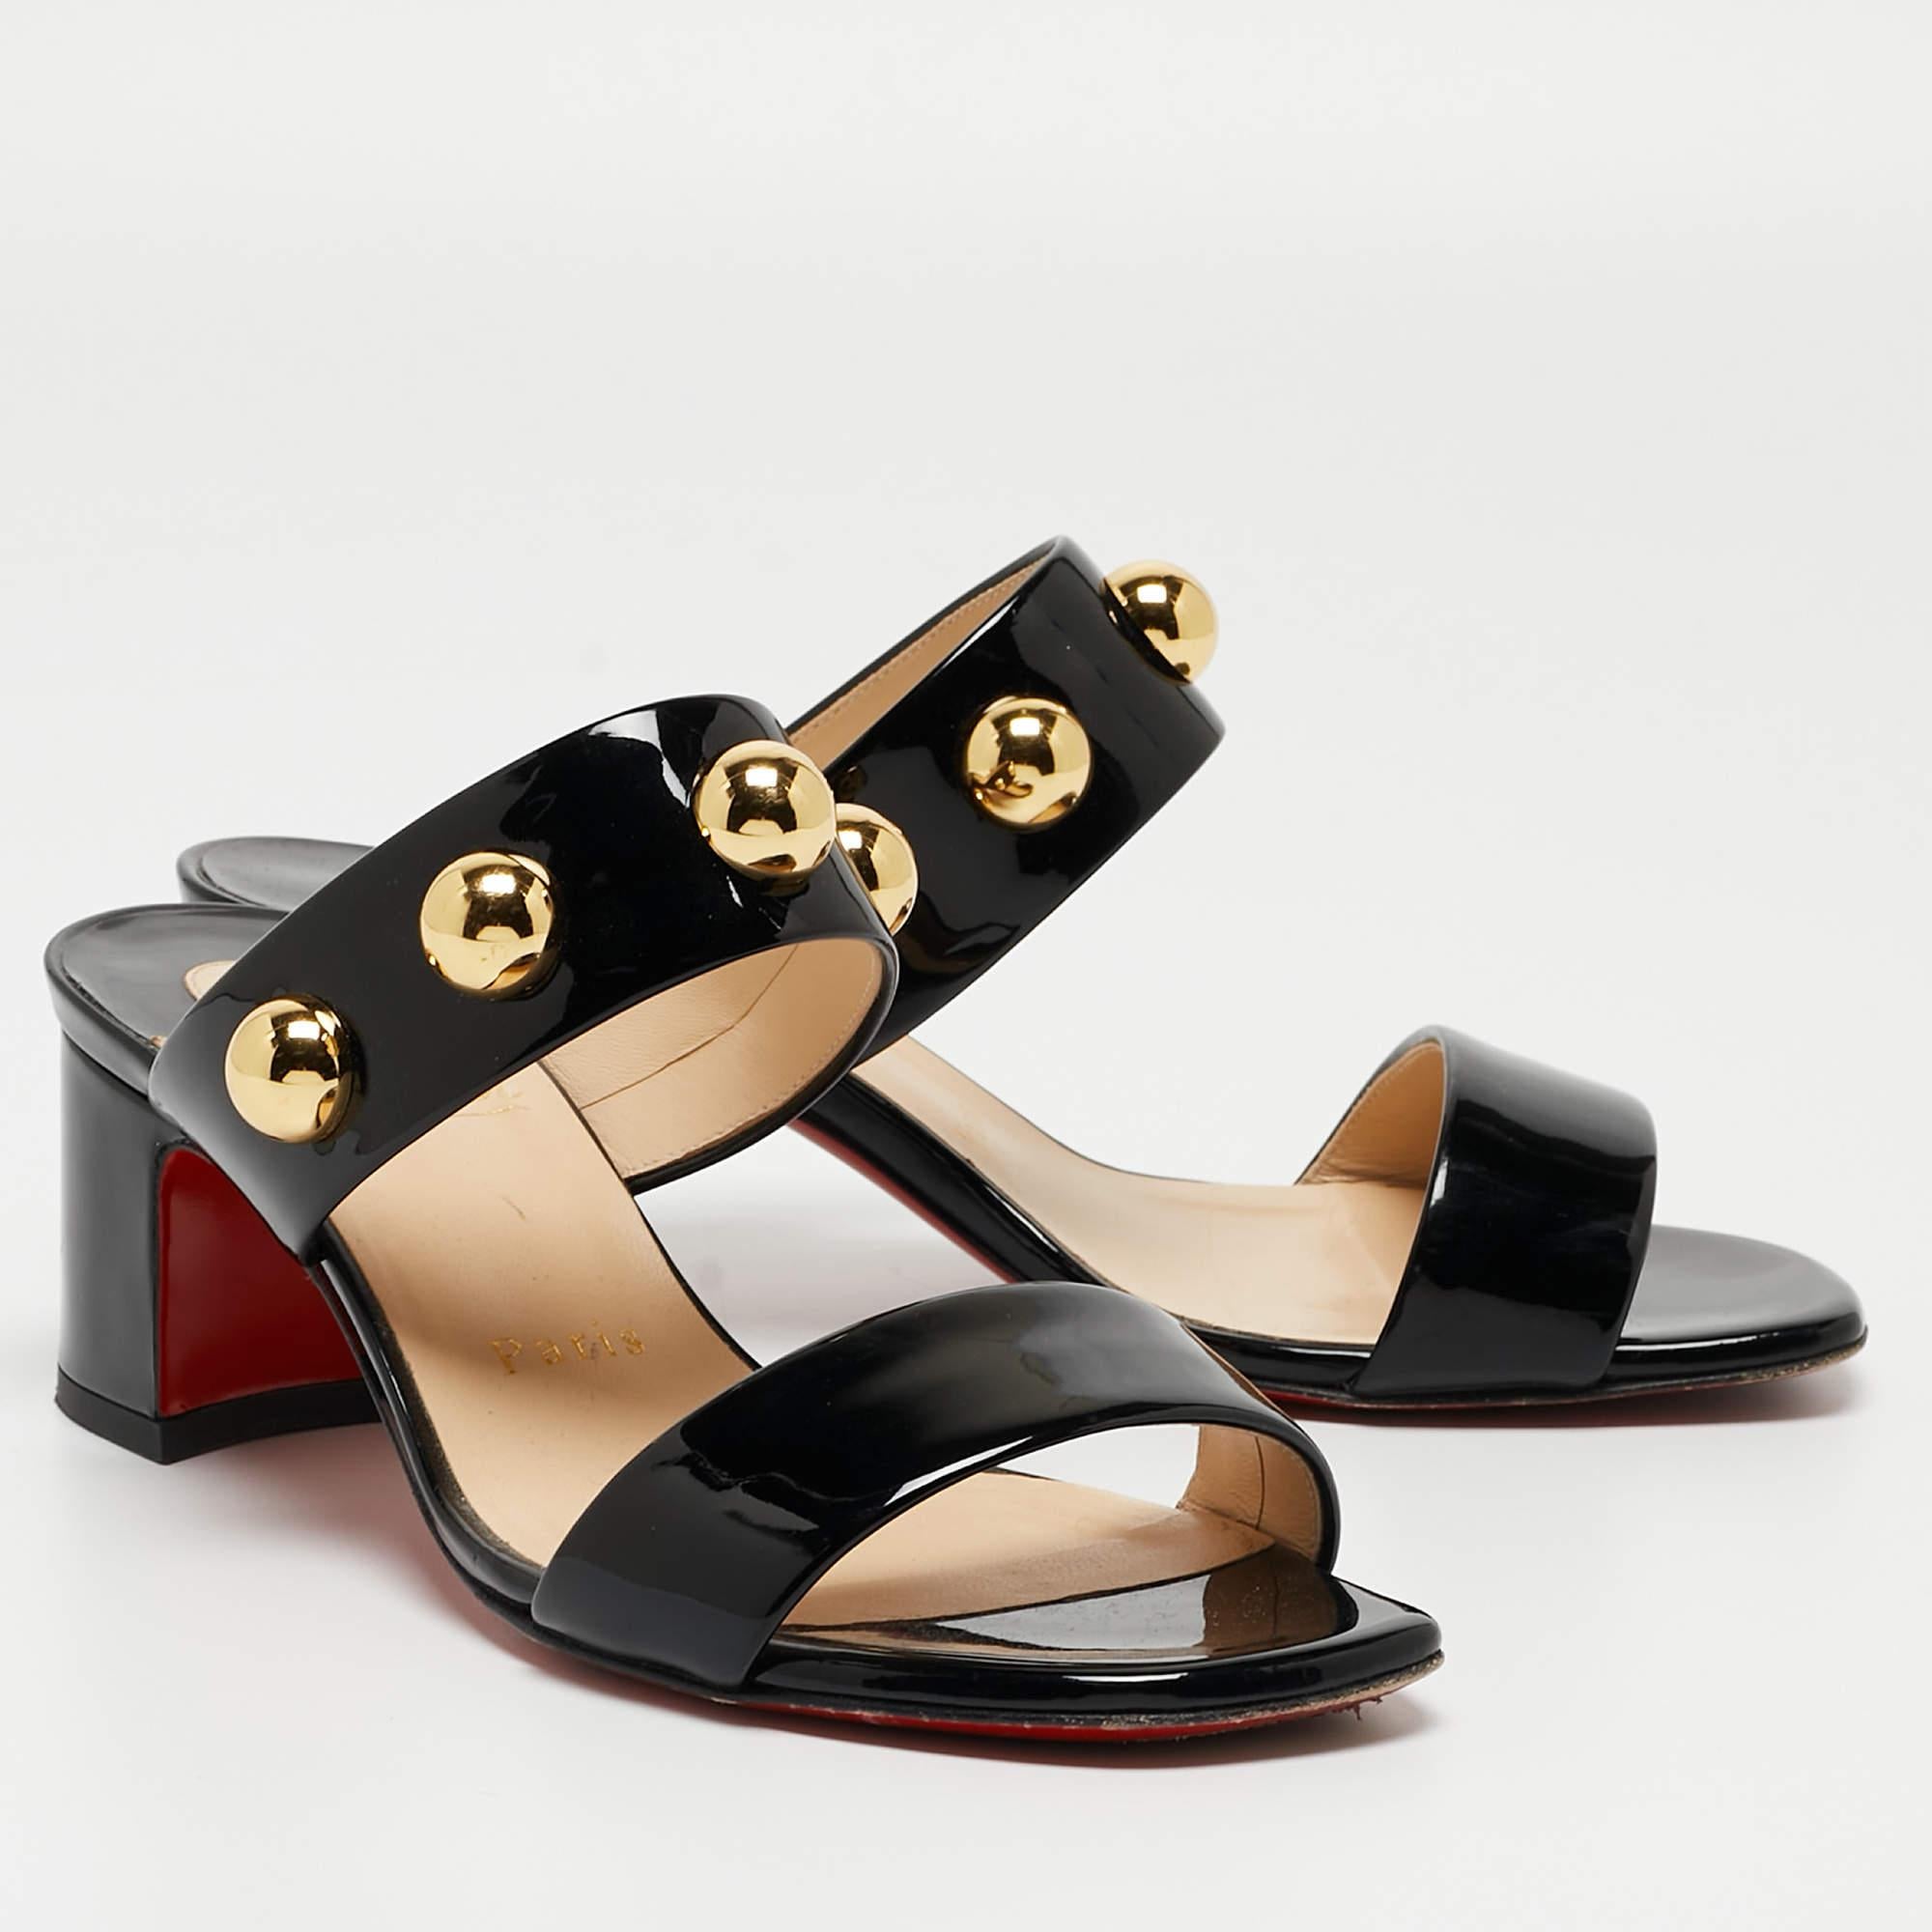 Louboutins are designed to lift one's attitude and outfit. Let this pair lift yours as well by owning them today. Crafted from patent leather, these black sandals feature an open-toe silhouette and studded vamp straps. They are completed with 5cm